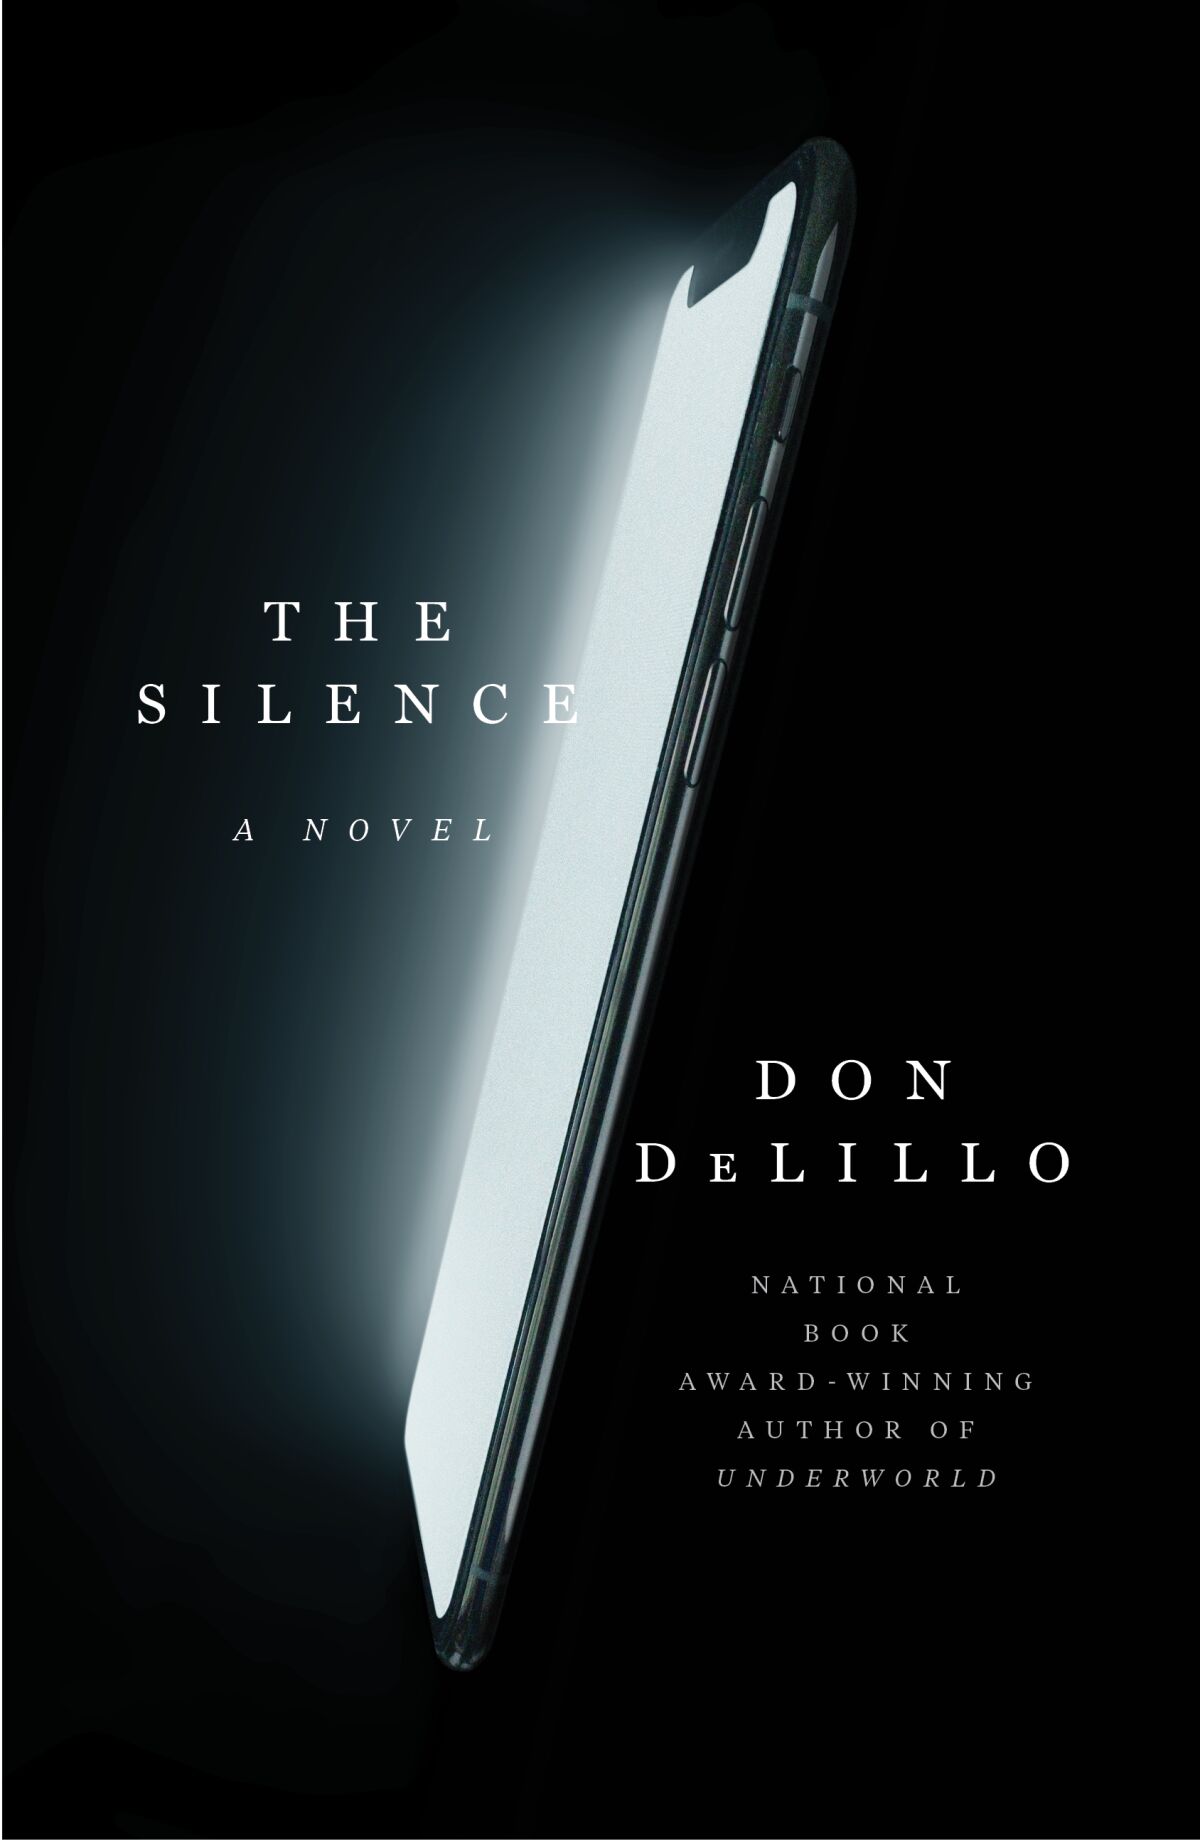 Author Don DeLillo's new book is "The Silence".